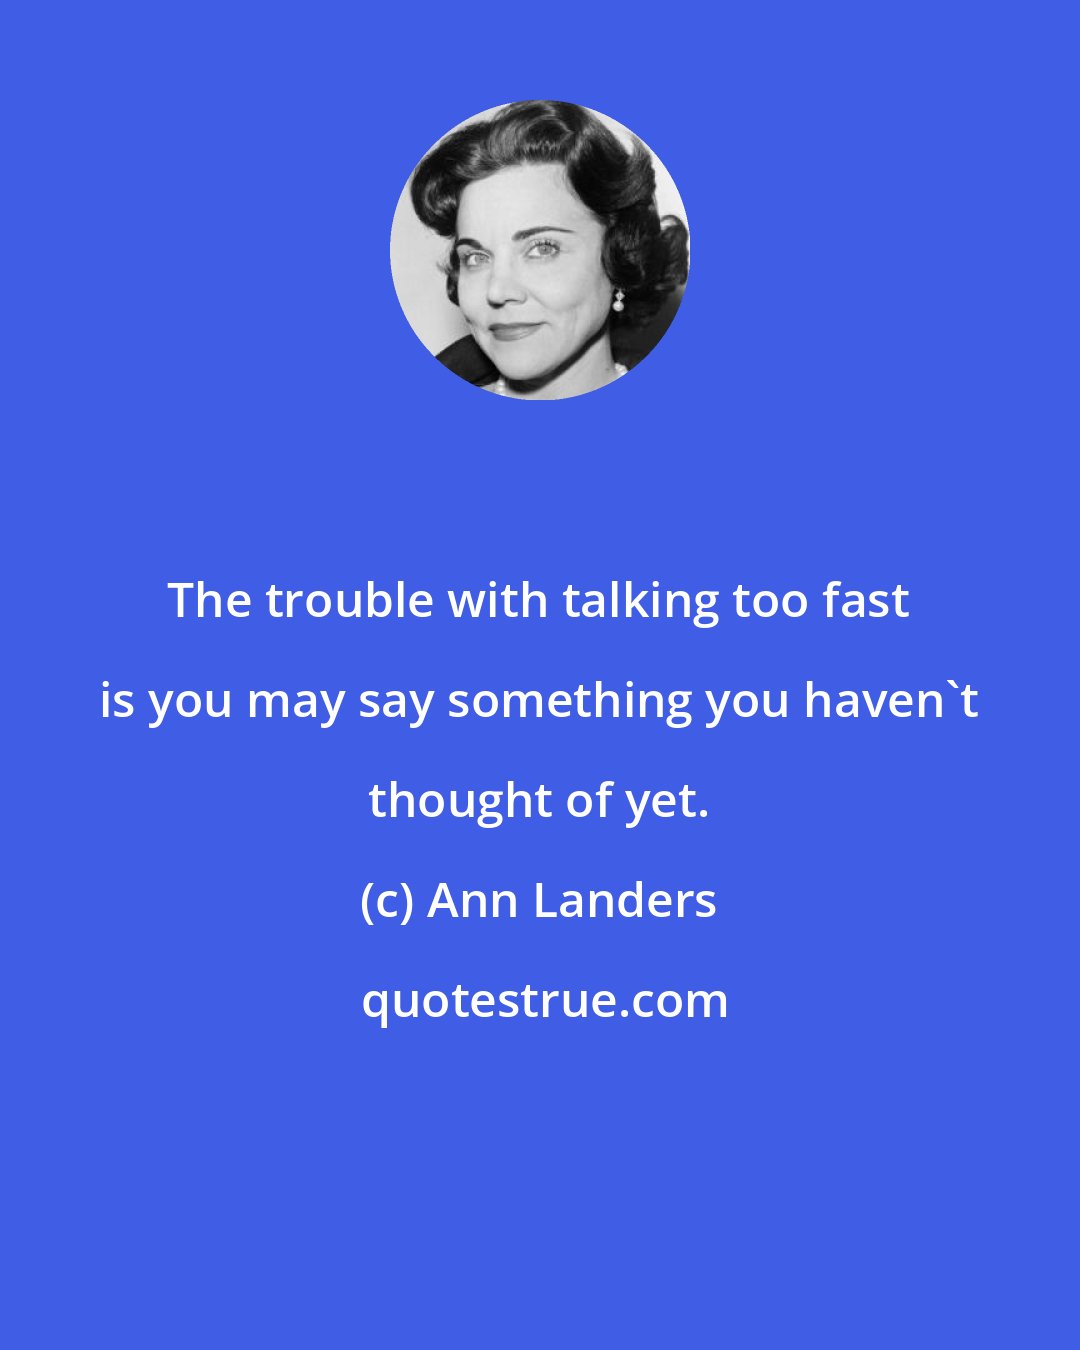 Ann Landers: The trouble with talking too fast is you may say something you haven't thought of yet.